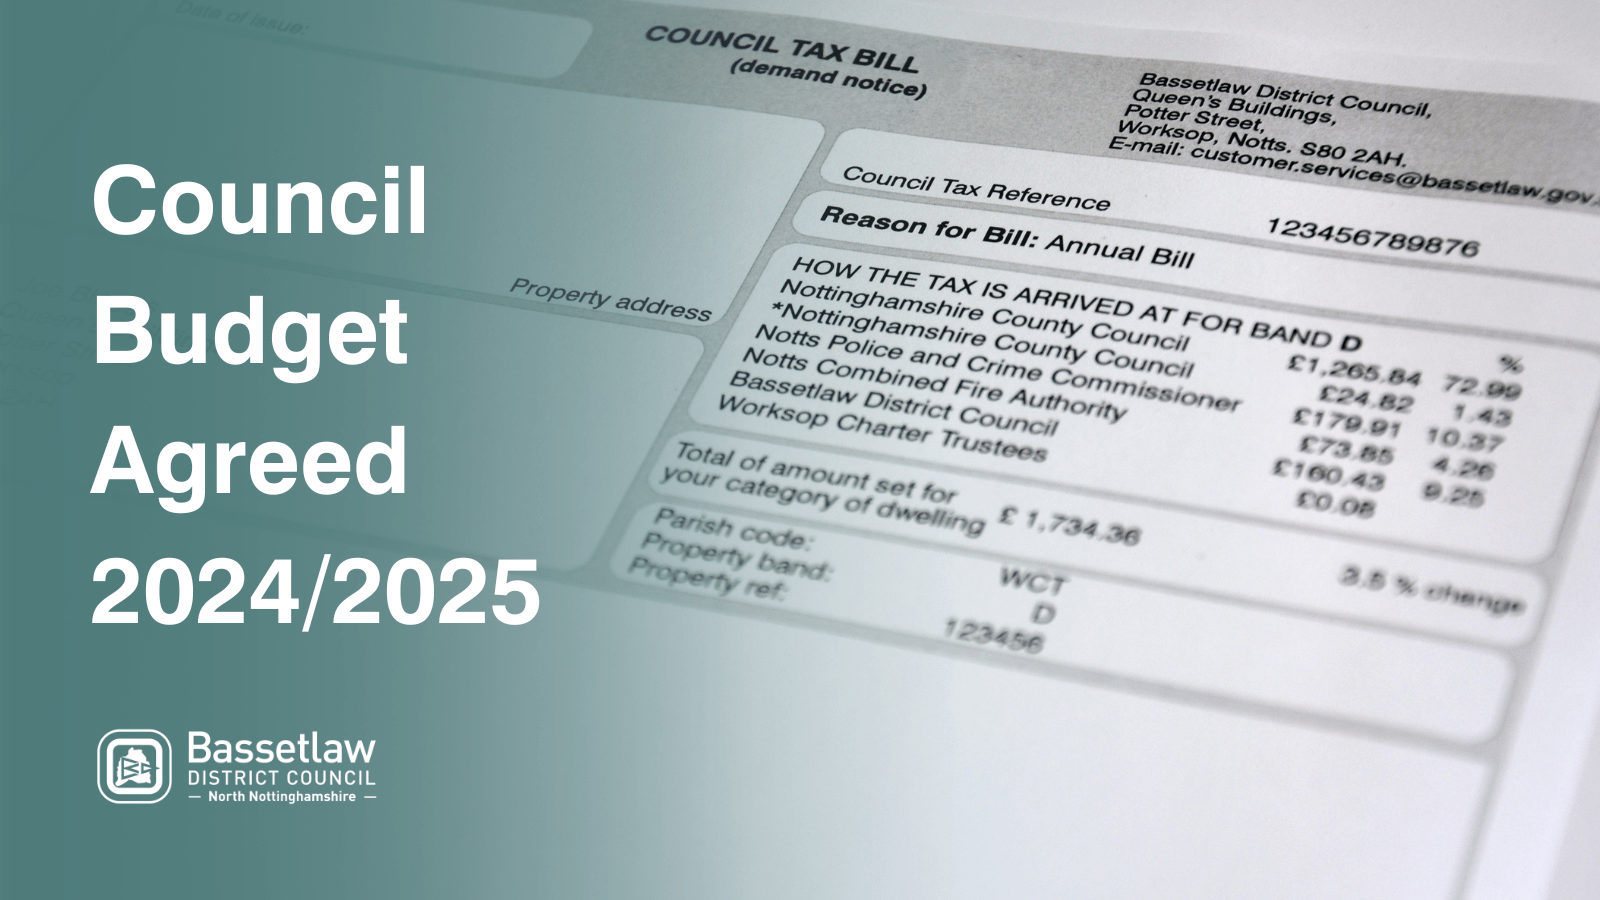 Council Budget agreed for 2024/25